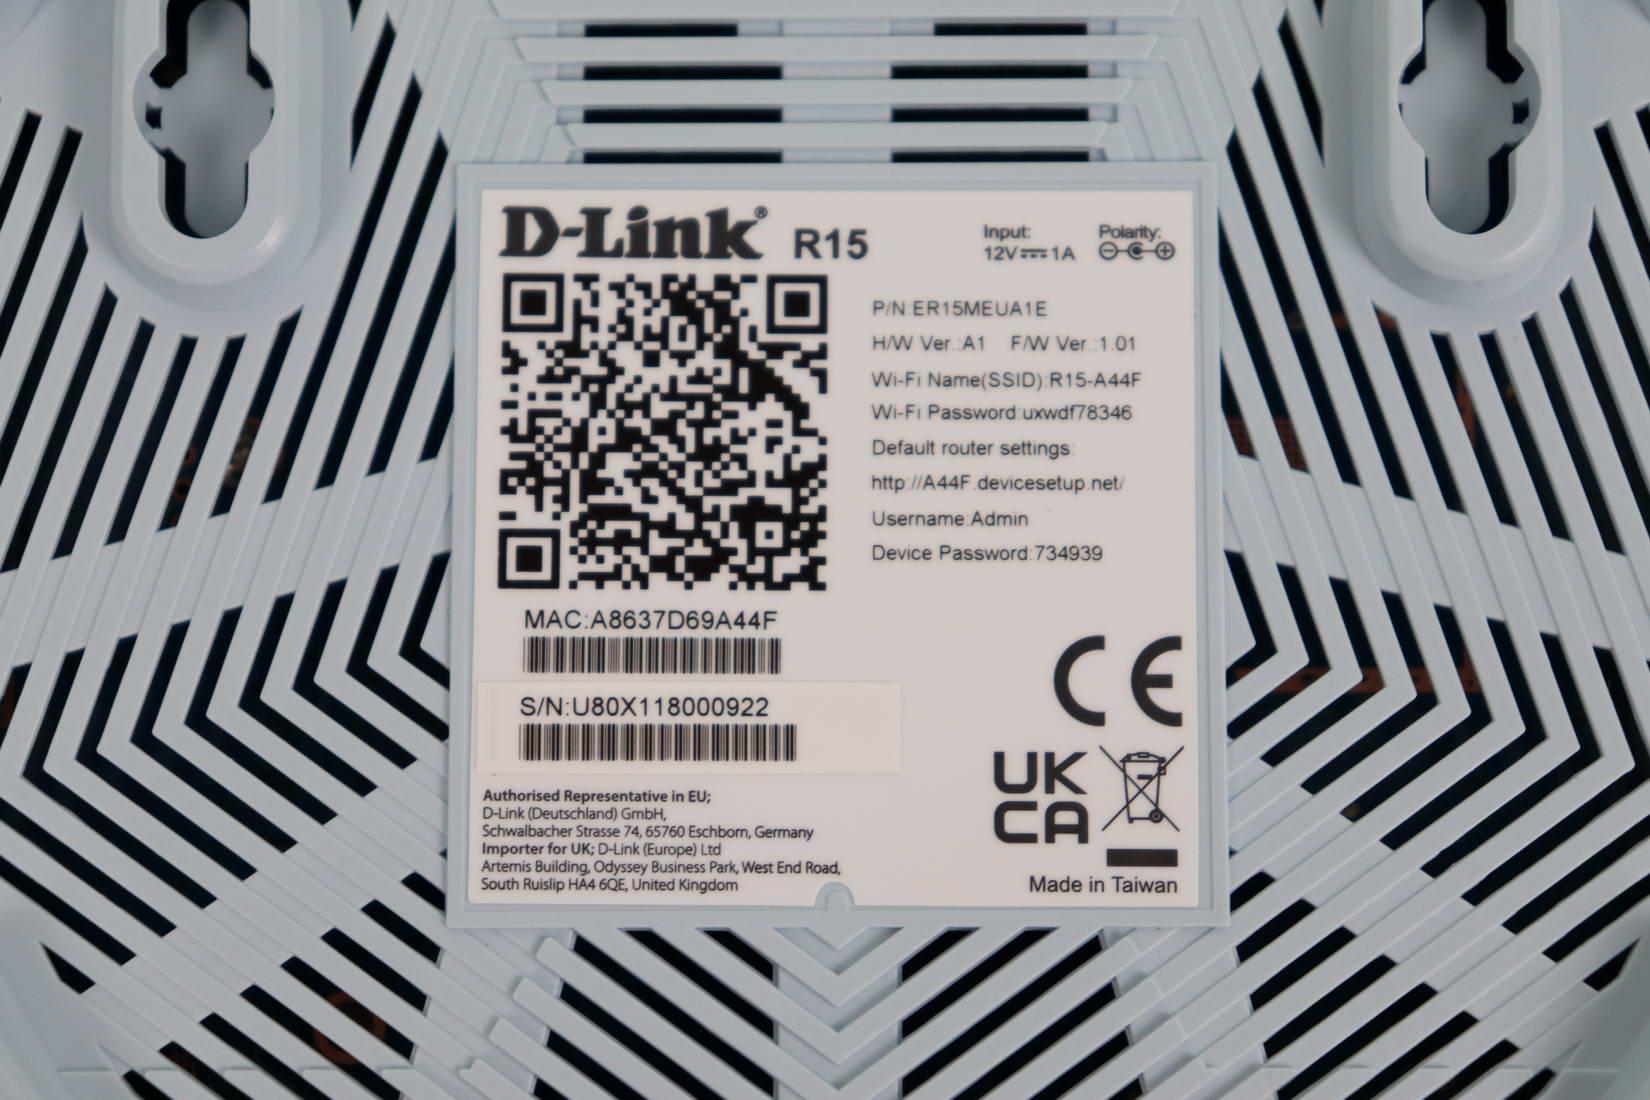 D-Link EAGLE PRO AI R15 WiFi router sticker with access data